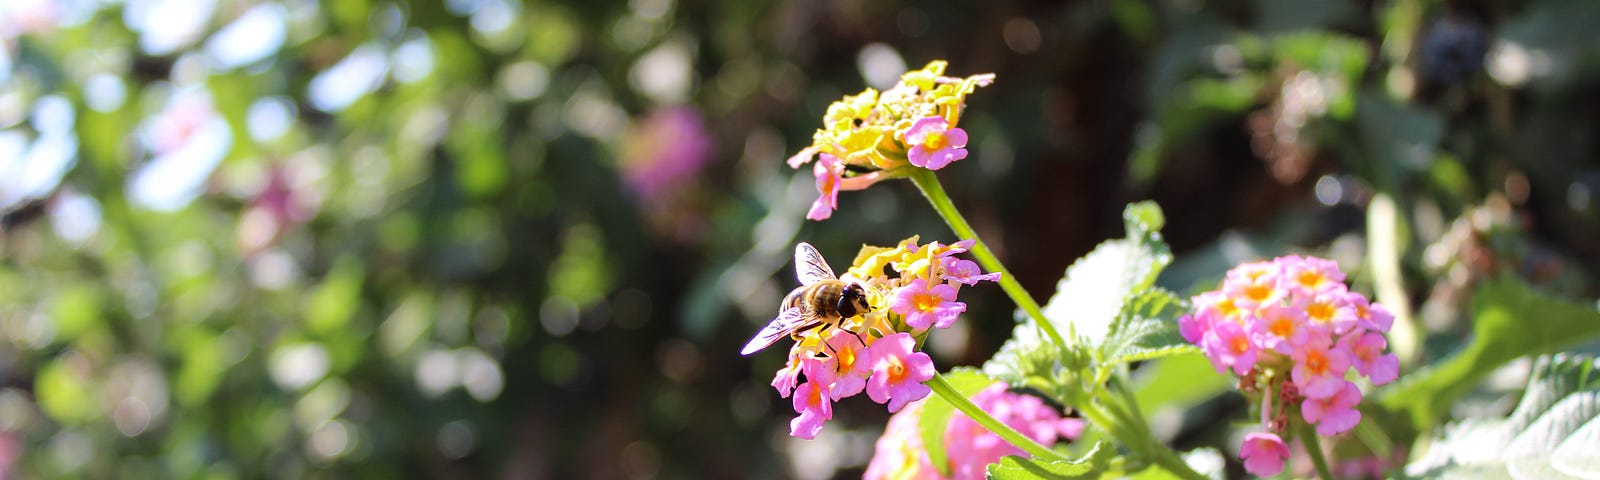 Pink and pale yellow lantana blooms with honey bee working over it. Dark green shrubbery in background.